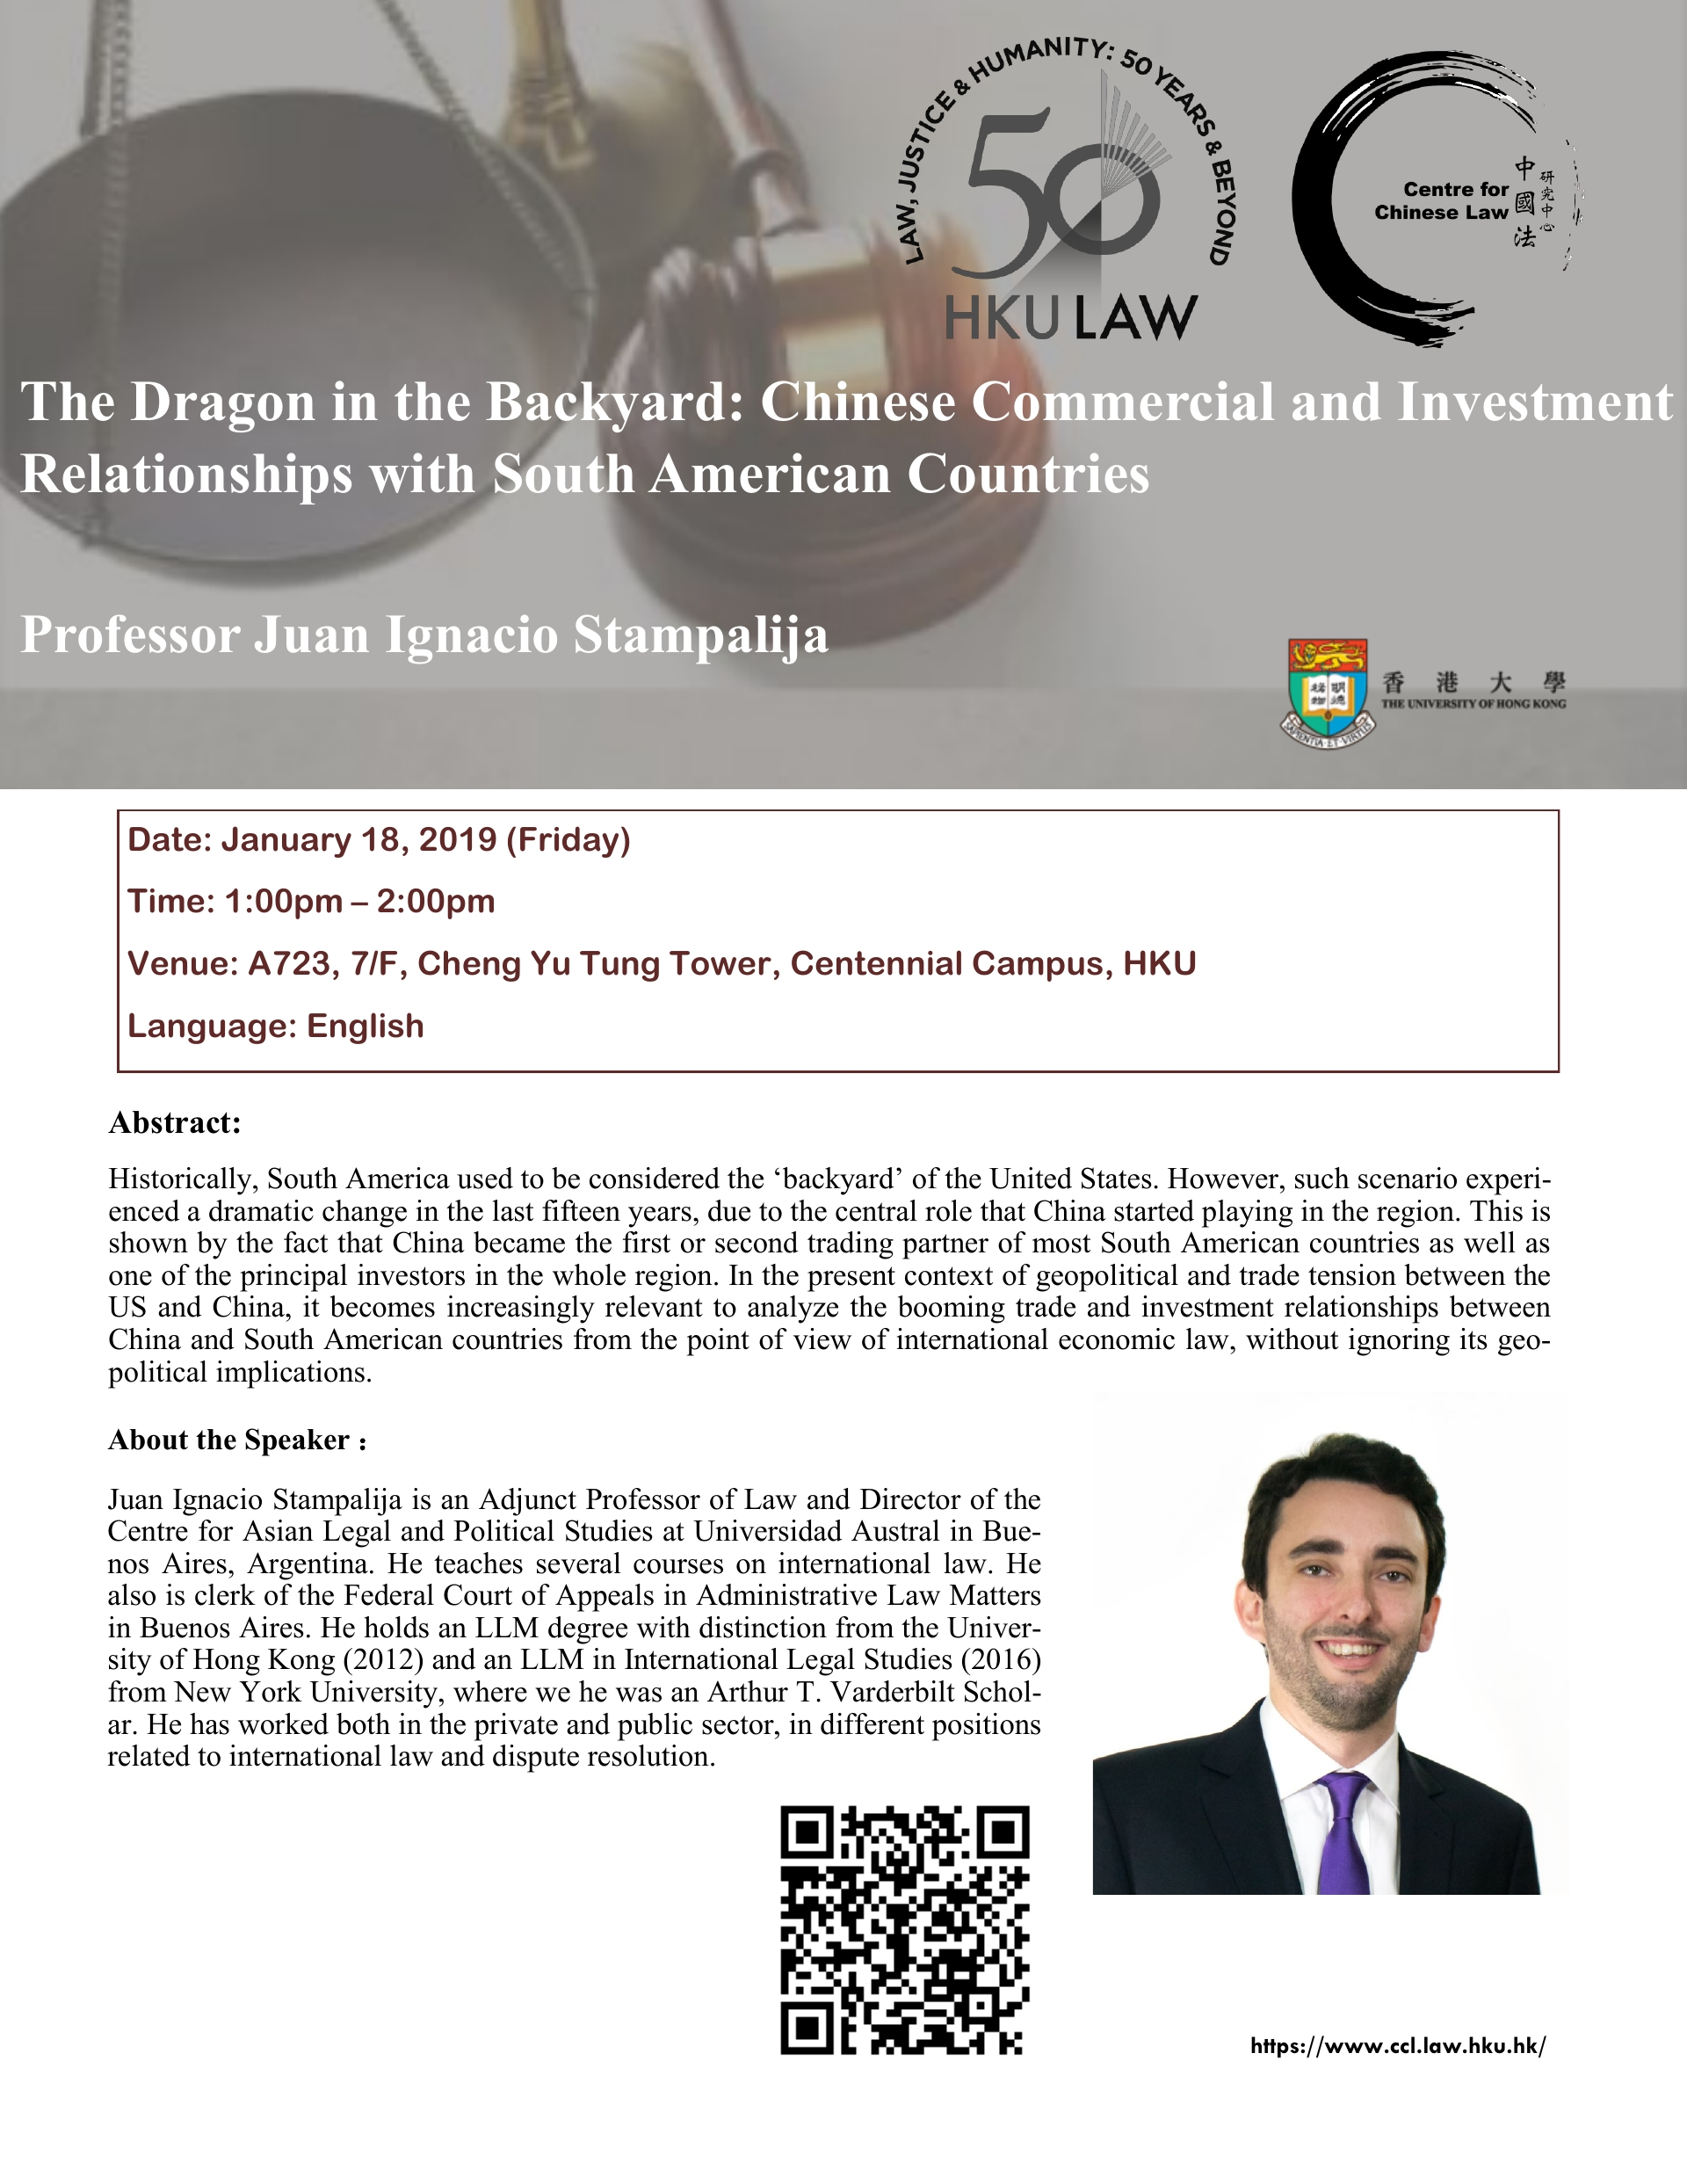 The Dragon in the Backyard: Chinese Commercial and Investment Relationships with South American Countries